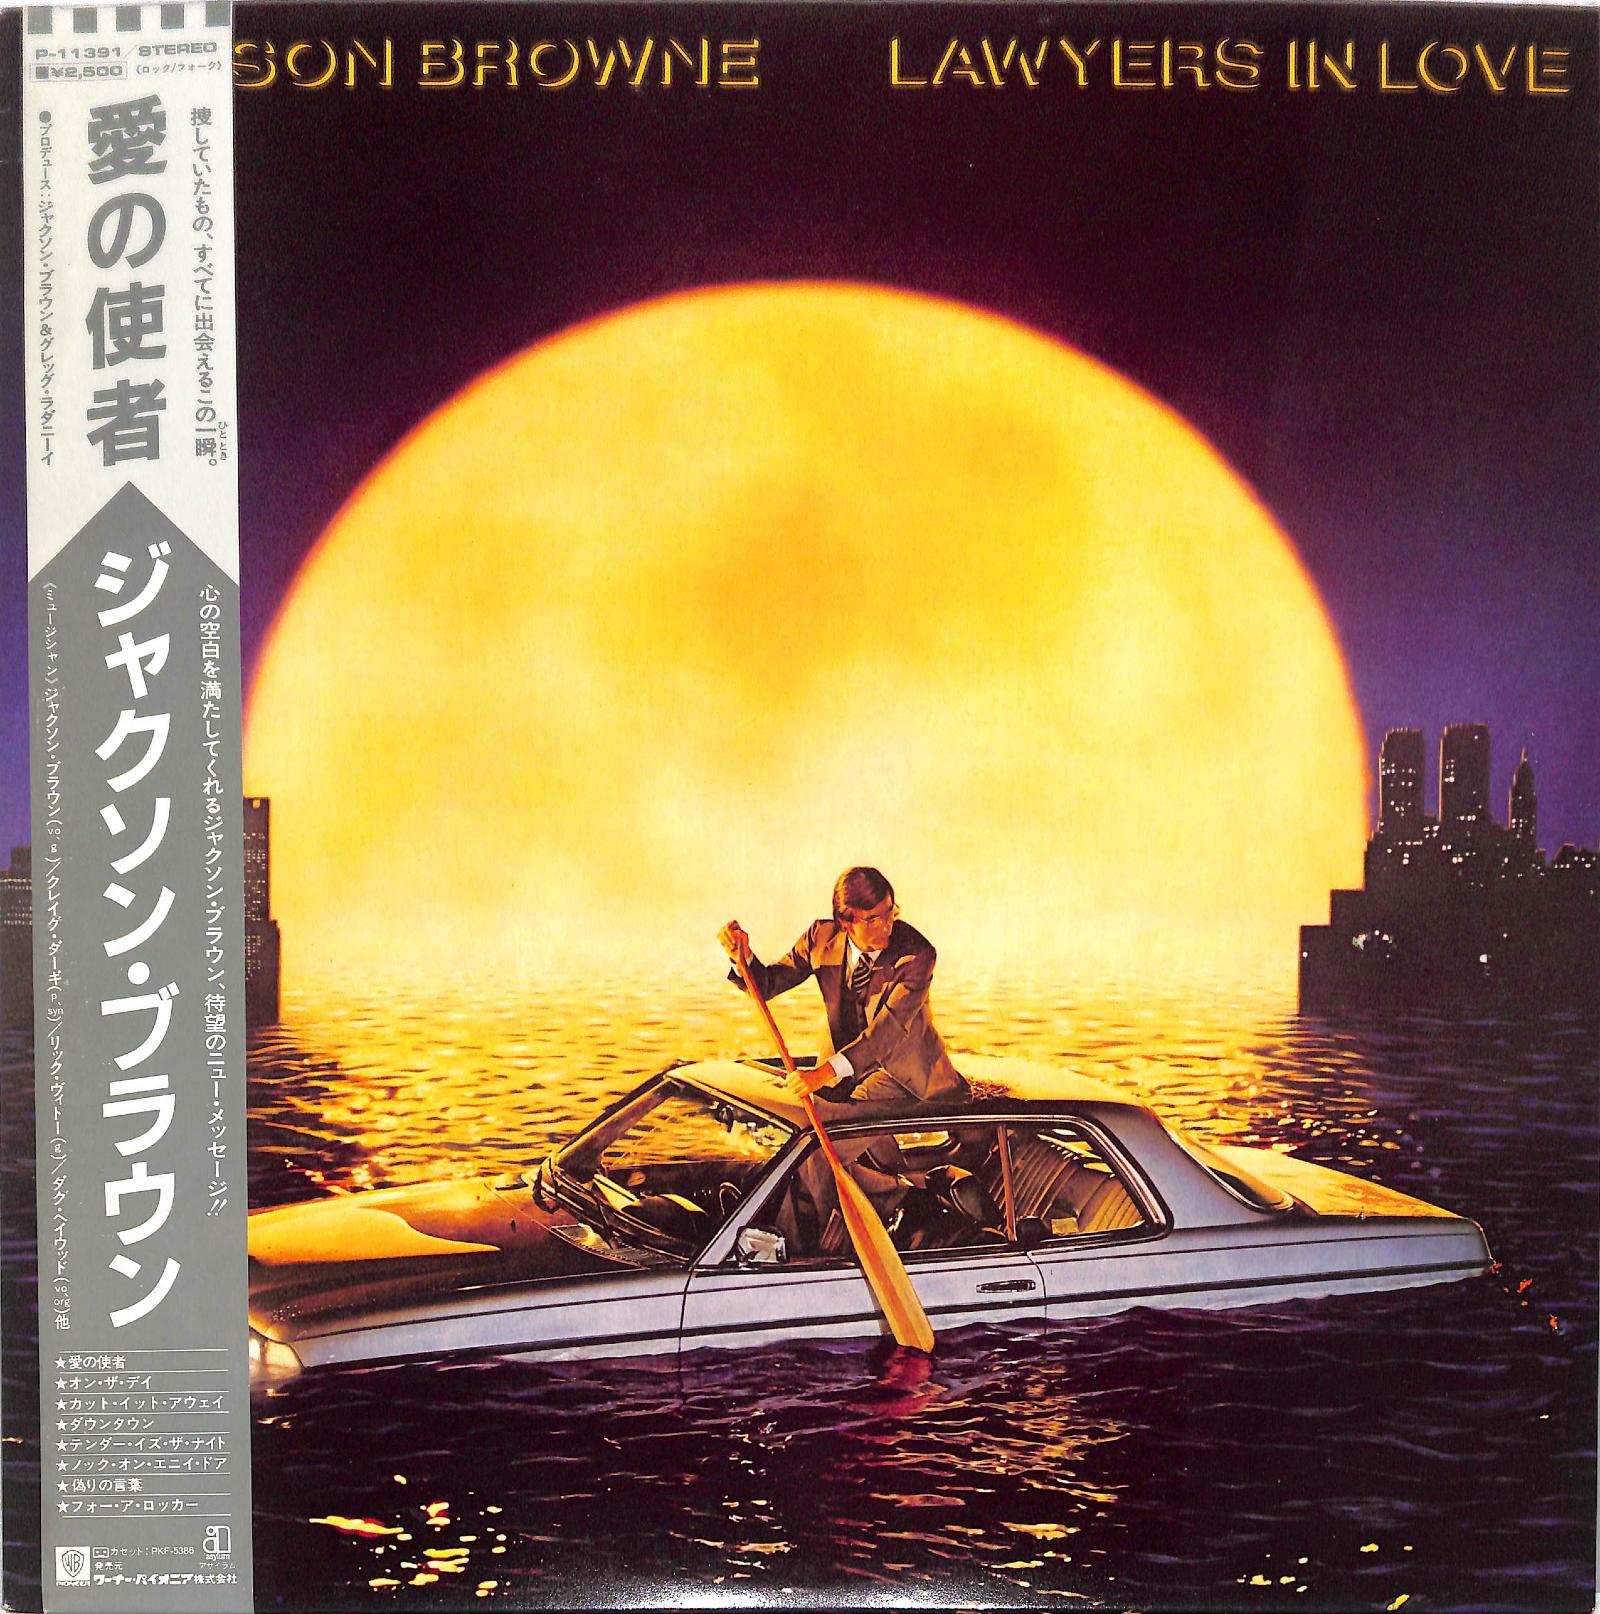 JACKSON BROWNE - Lawyers In Love